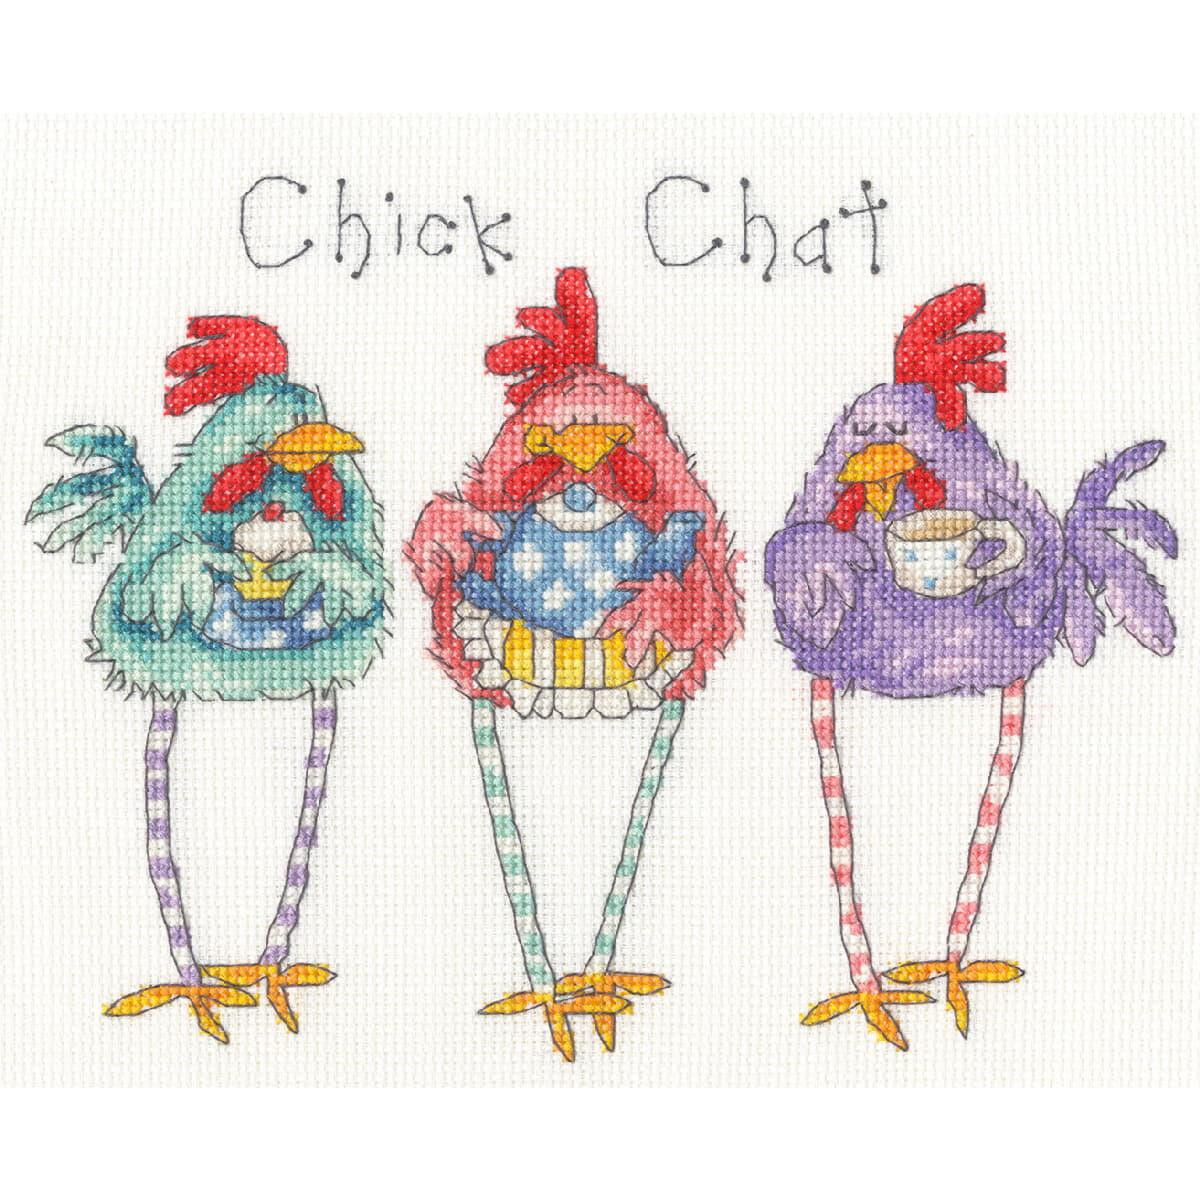 A colorful embroidery pack design from Bothy Threads...